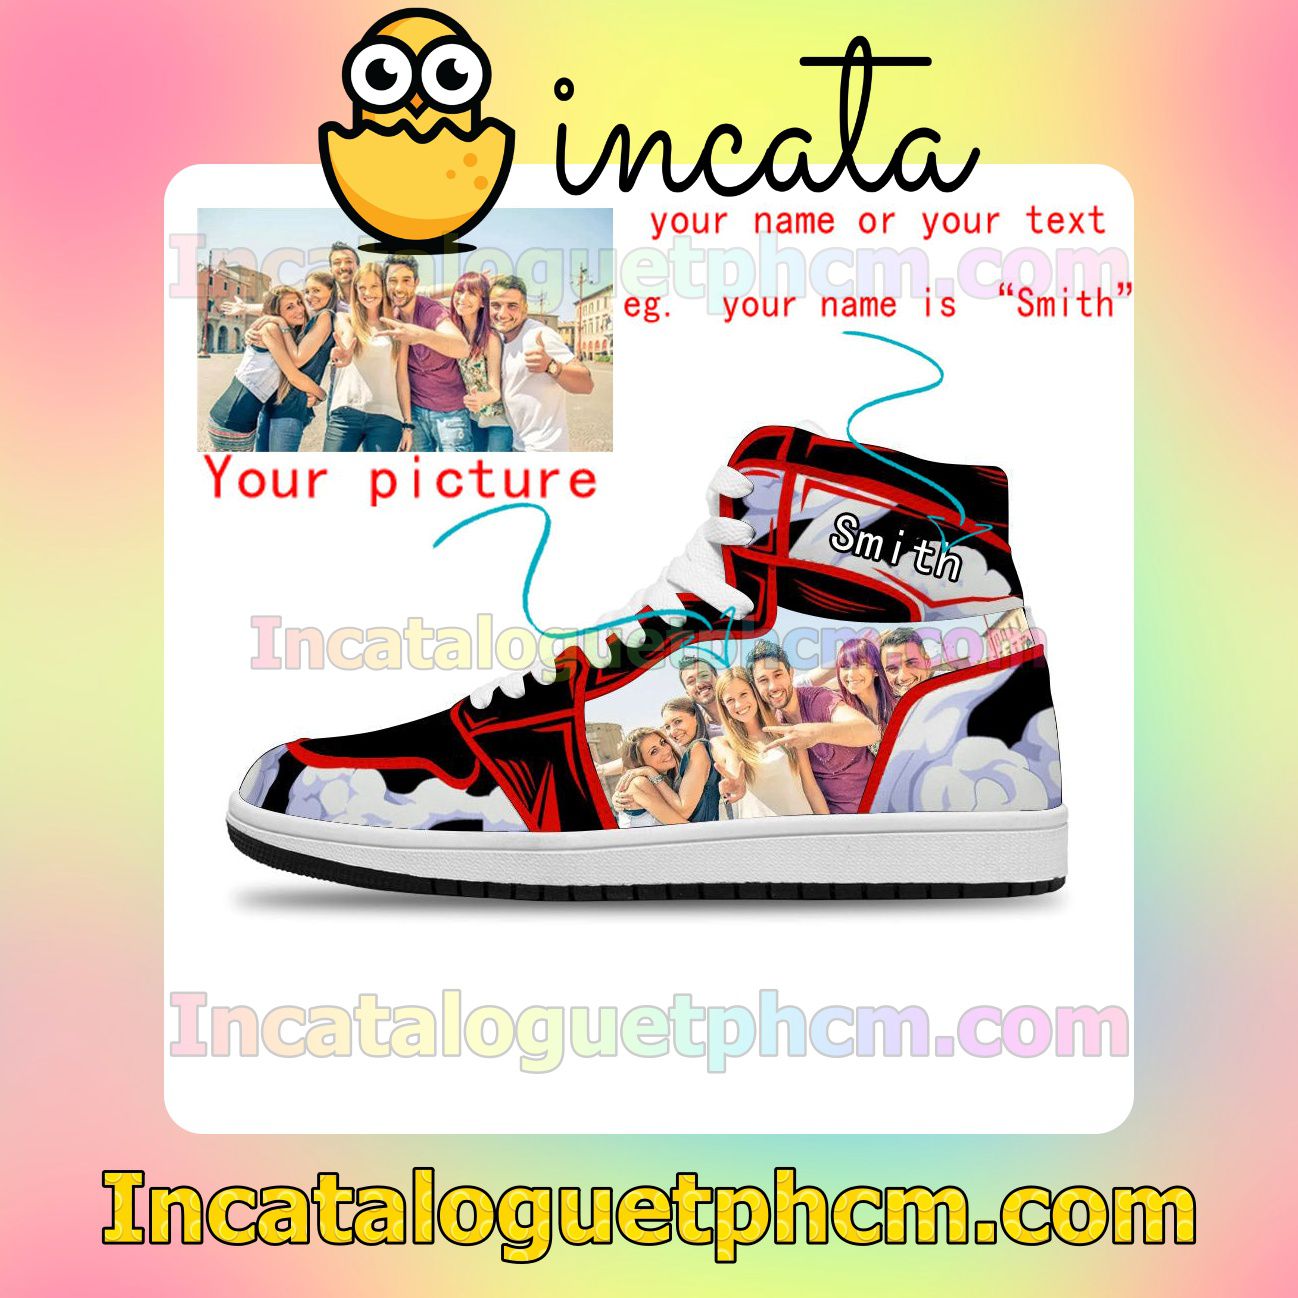 Personalized One Piece Custom Shoes Luffy Gear 4 Custom Snakeman Anime Air Jordan 1 Inspired Shoes